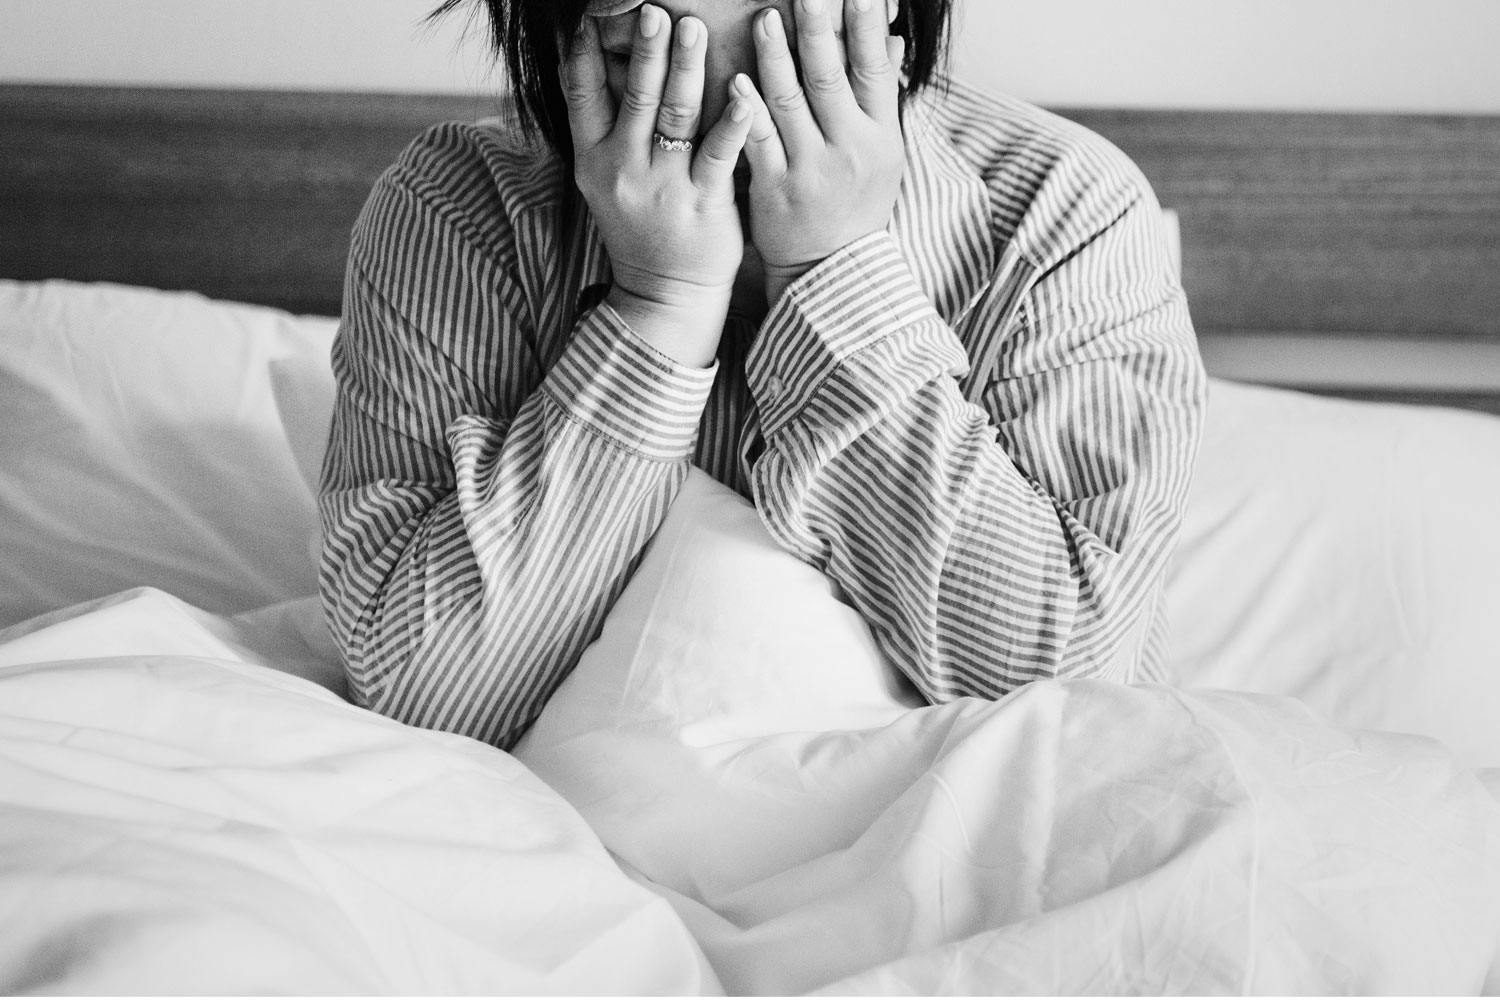 A woman buries her face in her hands. She wears a striped button-down shirt and sits in bed.